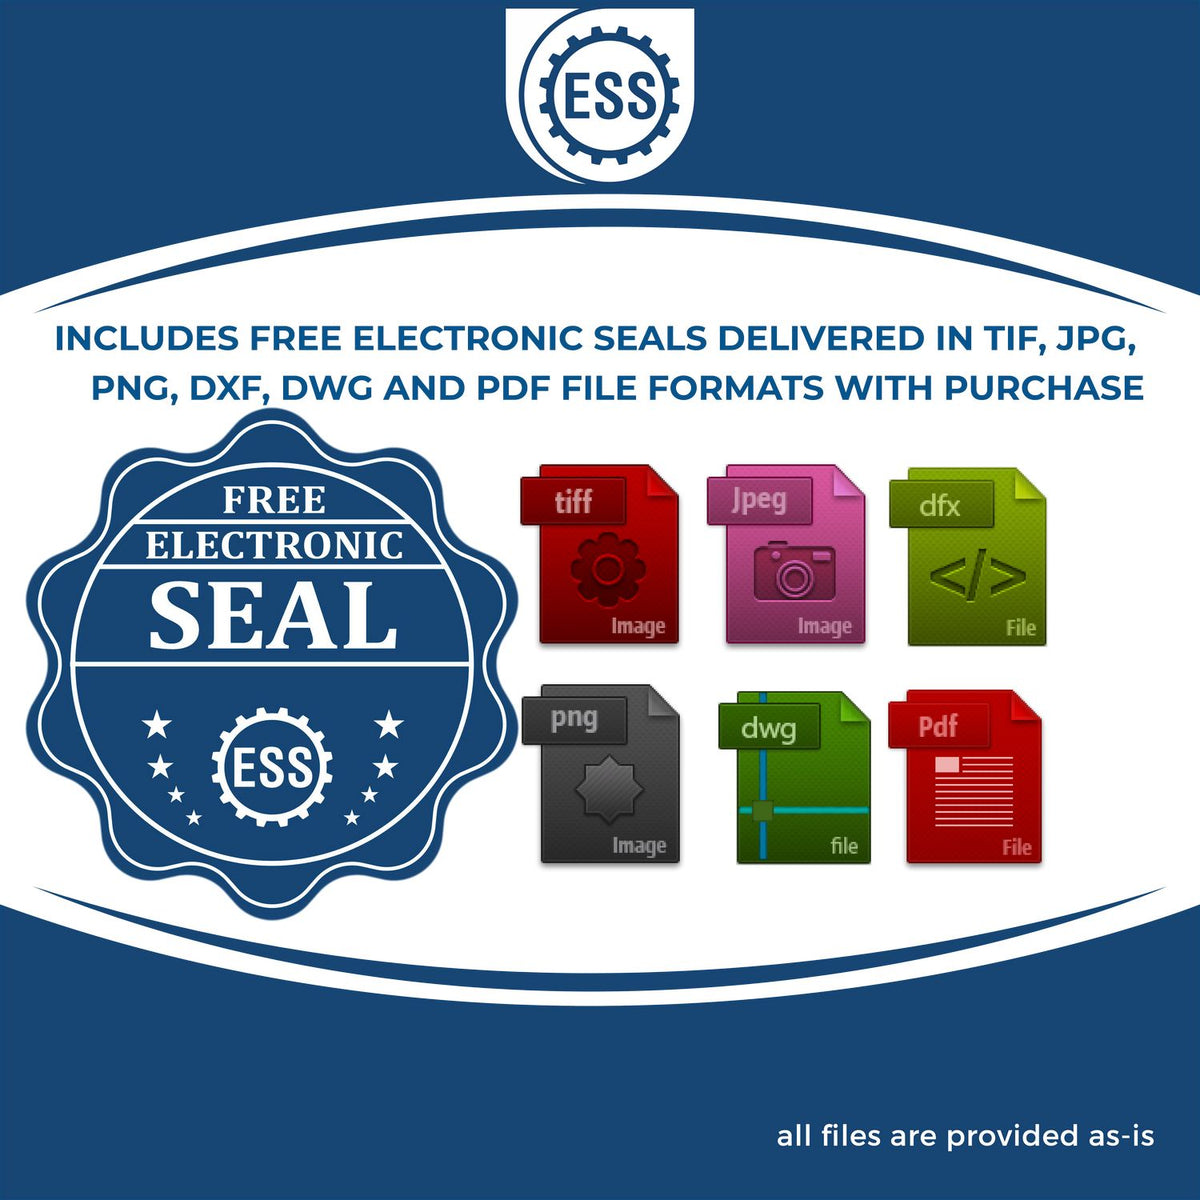 An infographic for the free electronic seal for the North Dakota Professional Geologist Seal Stamp illustrating the different file type icons such as DXF, DWG, TIF, JPG and PNG.